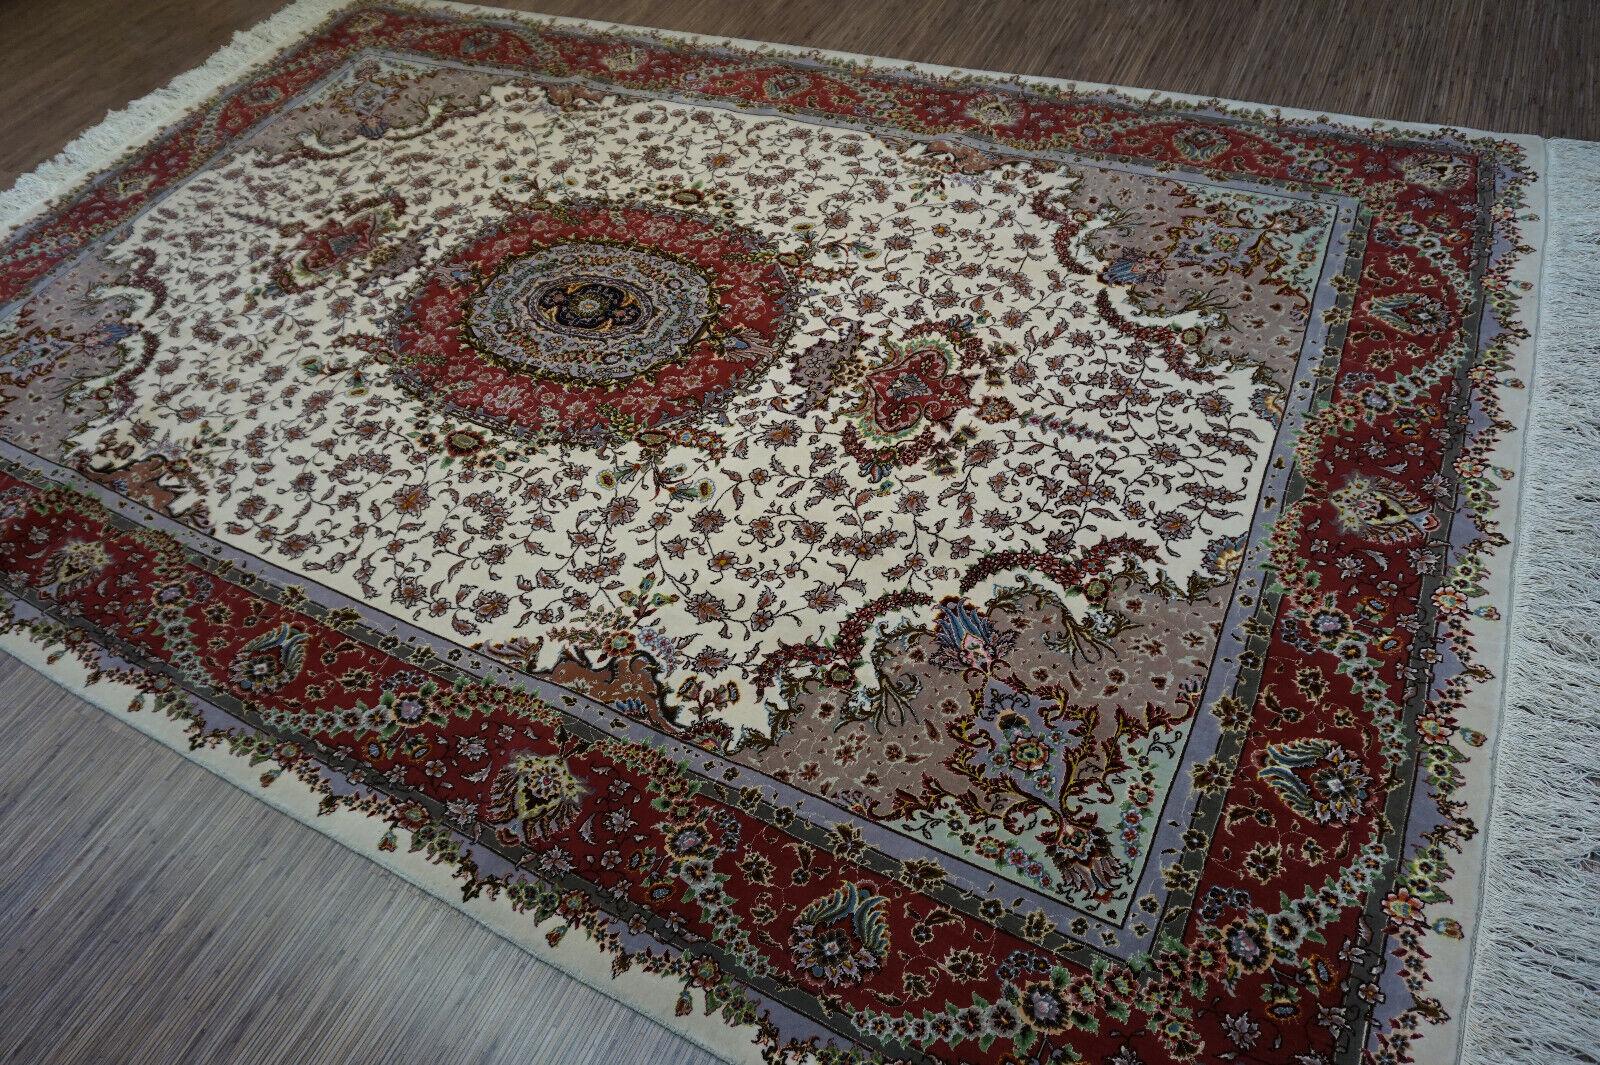 Handmade Vintage Persian Style Tabriz Rug with Silk
Add opulence and sophistication to your living space with our exquisite Handmade Vintage Persian Style Tabriz Rug with Silk. Crafted in the 1980s, this rug seamlessly blends tradition and luxury.